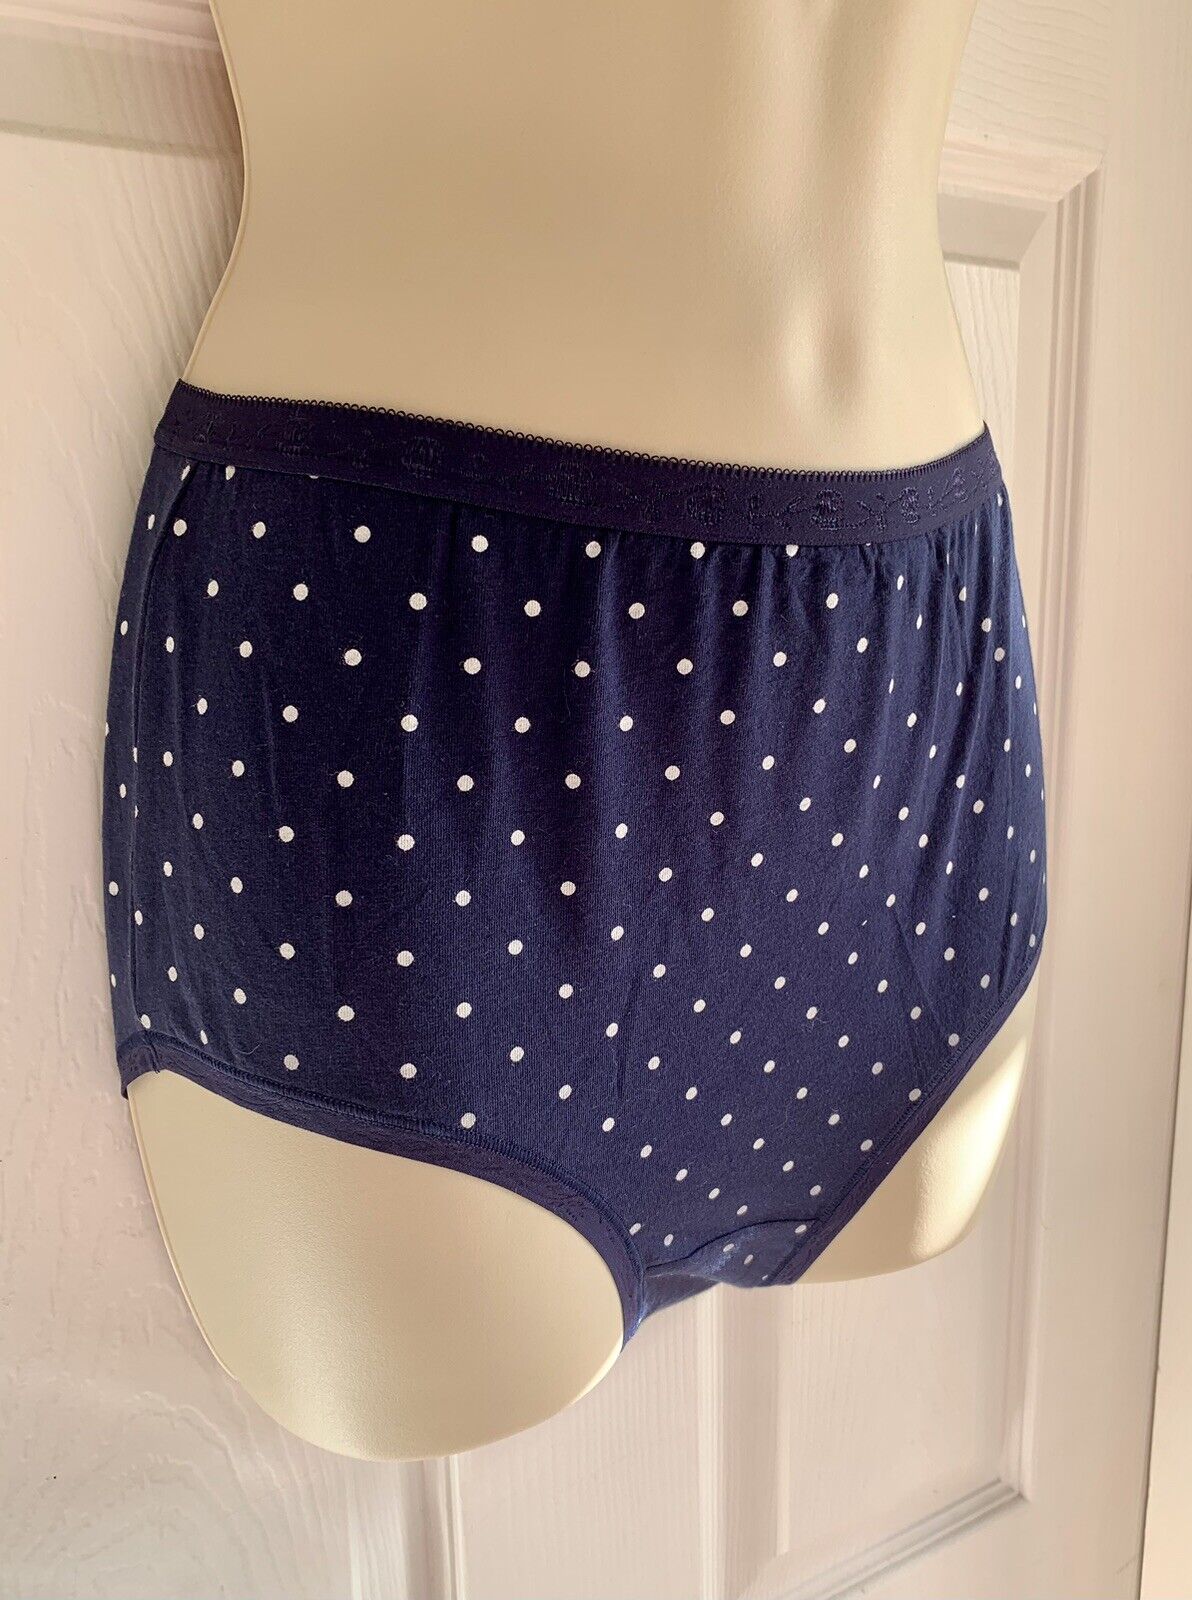 EX M*S Blue Cotton Rich Jacquard Waist Spotted Full Briefs Sizes 8, 10, or 18